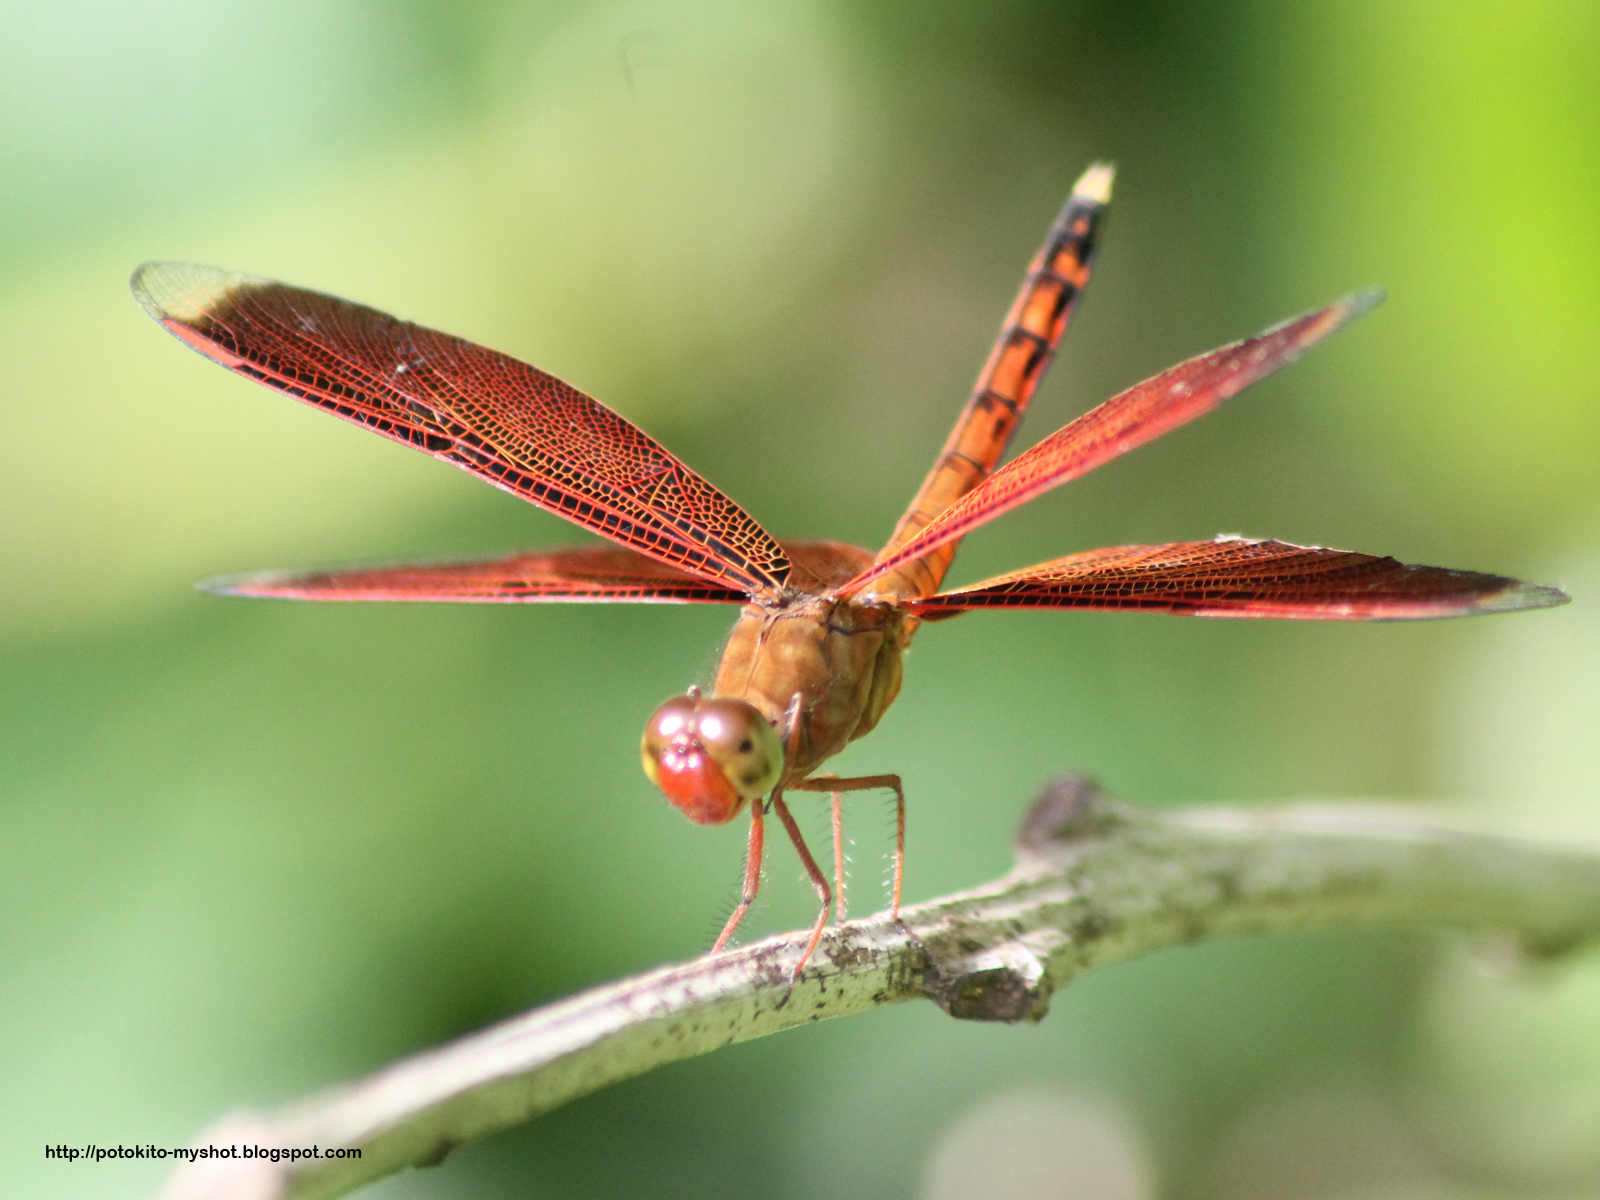 The Red Grasshawk Dragonfly (Neurothemis fluctuans)